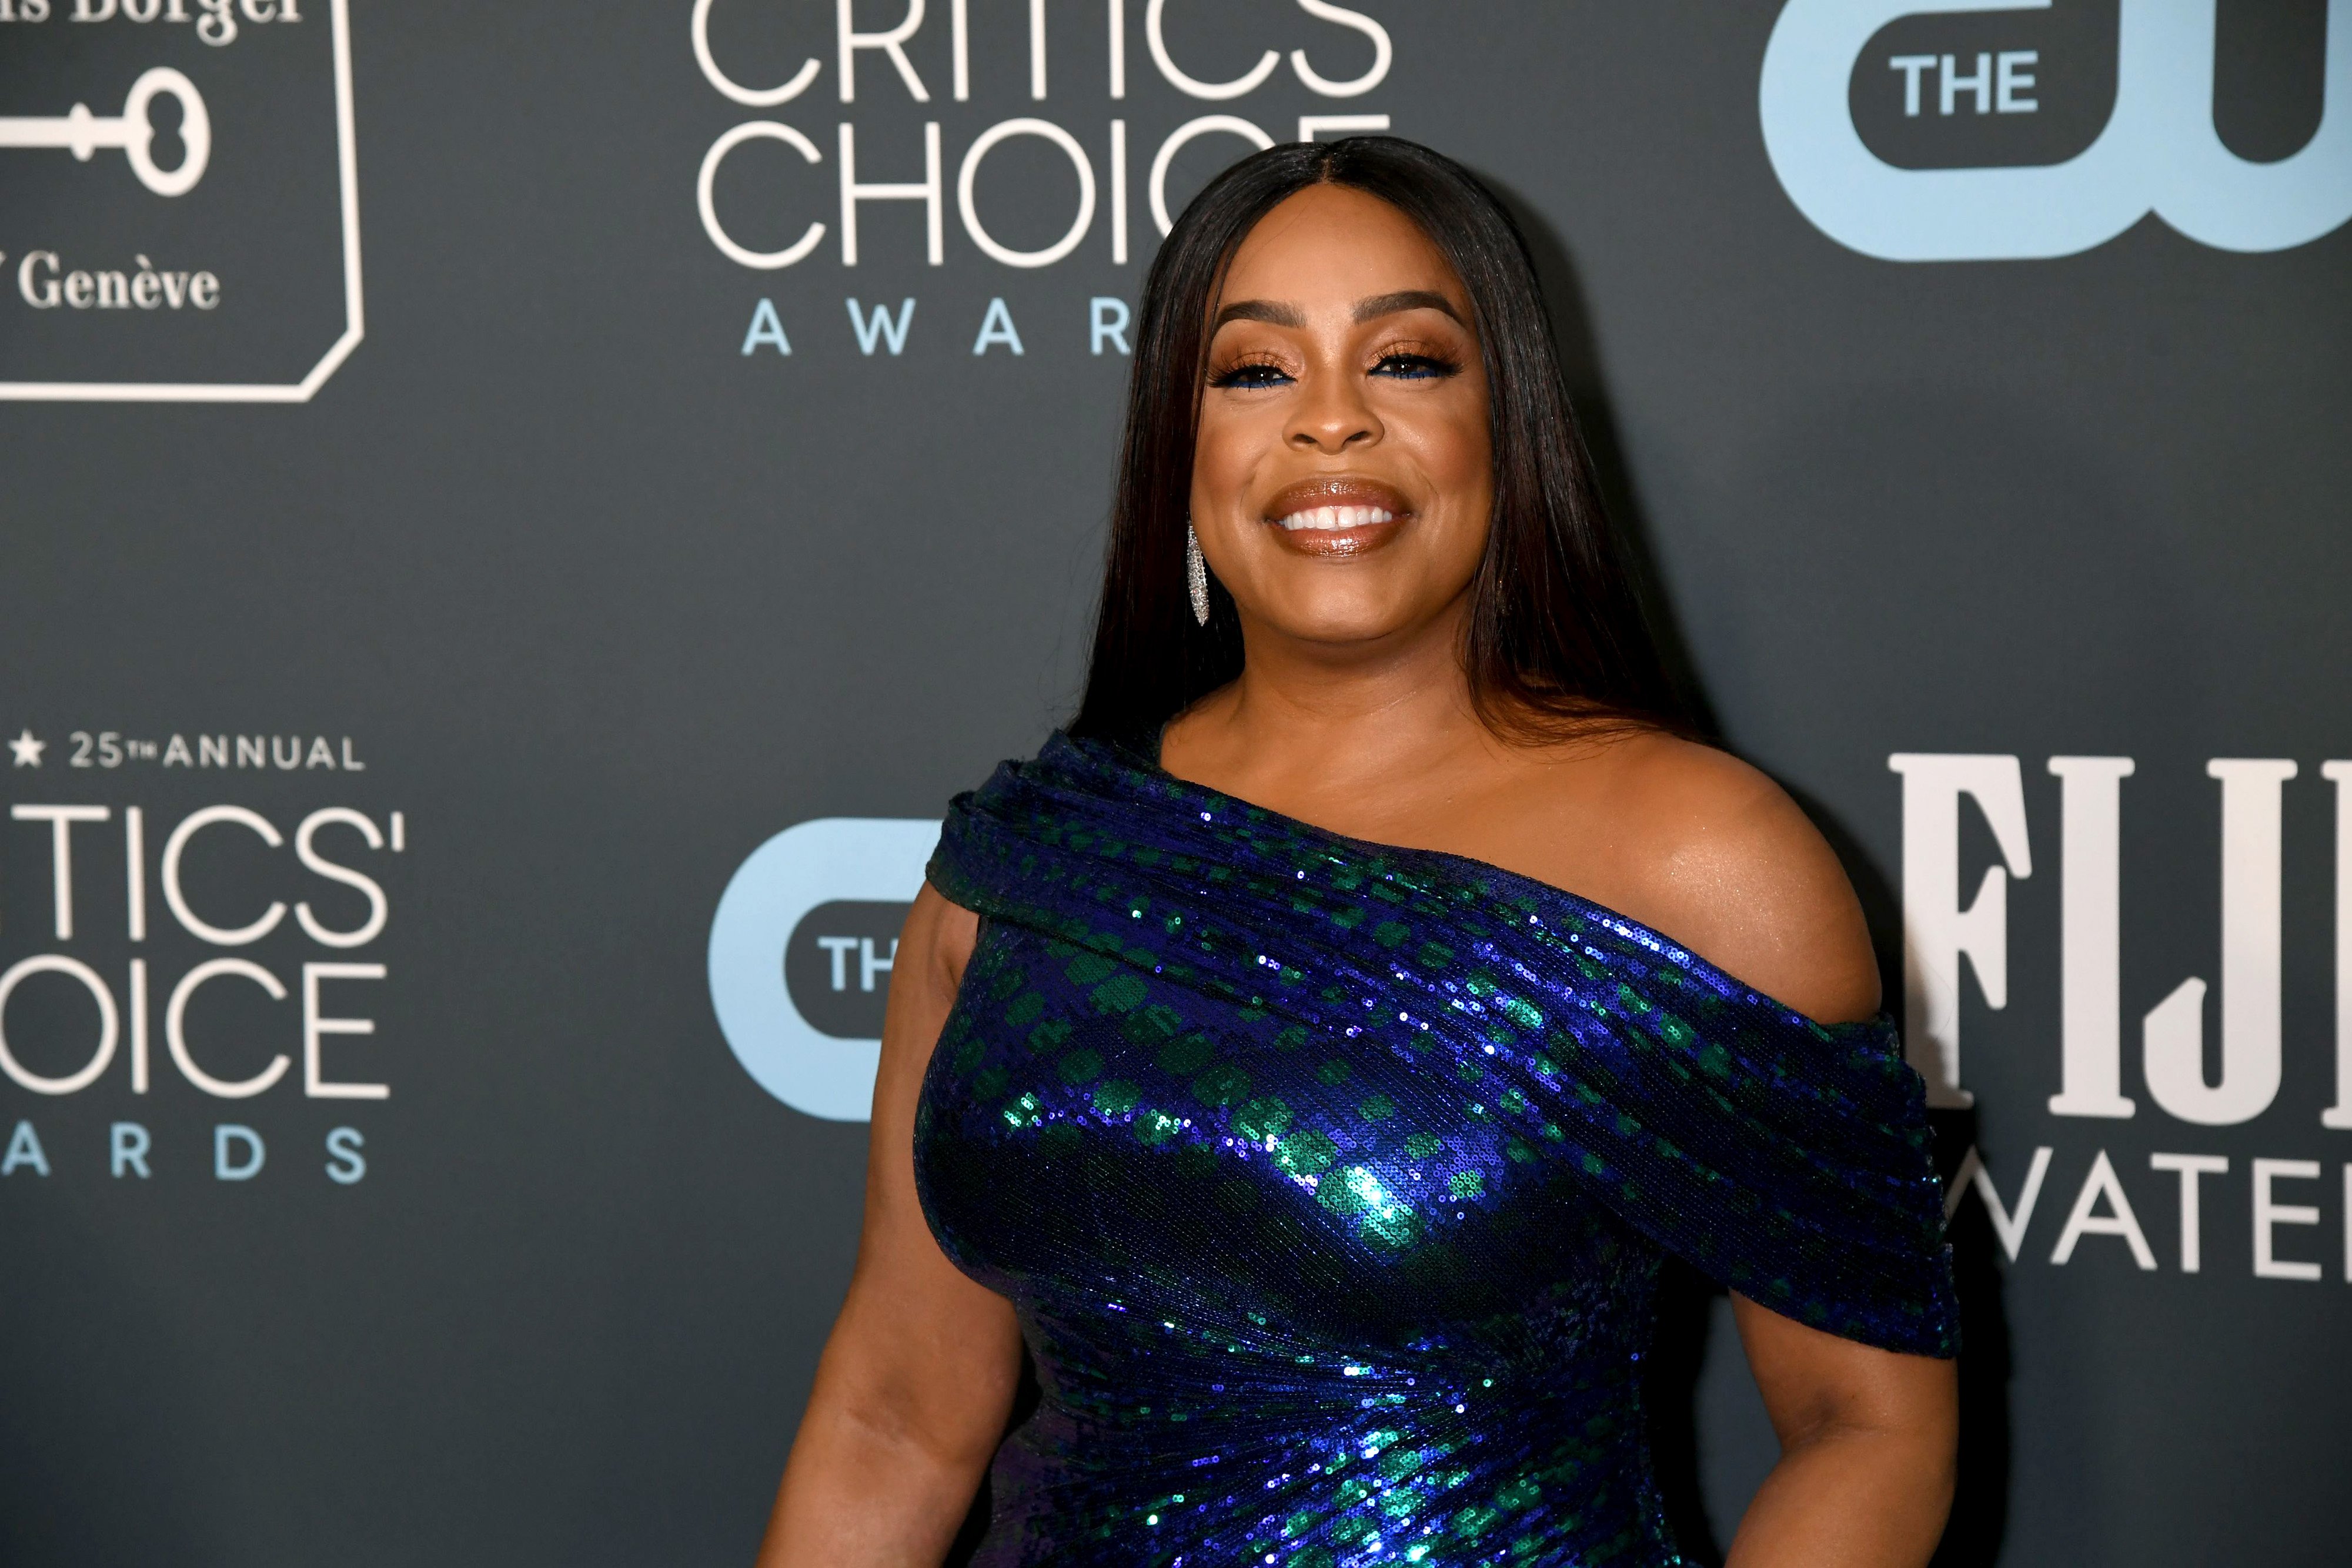 Niecy Nash at the 25th Annual Critics' Choice Awards on January 12, 2020 in Santa Monica, California. | Source: Getty Images